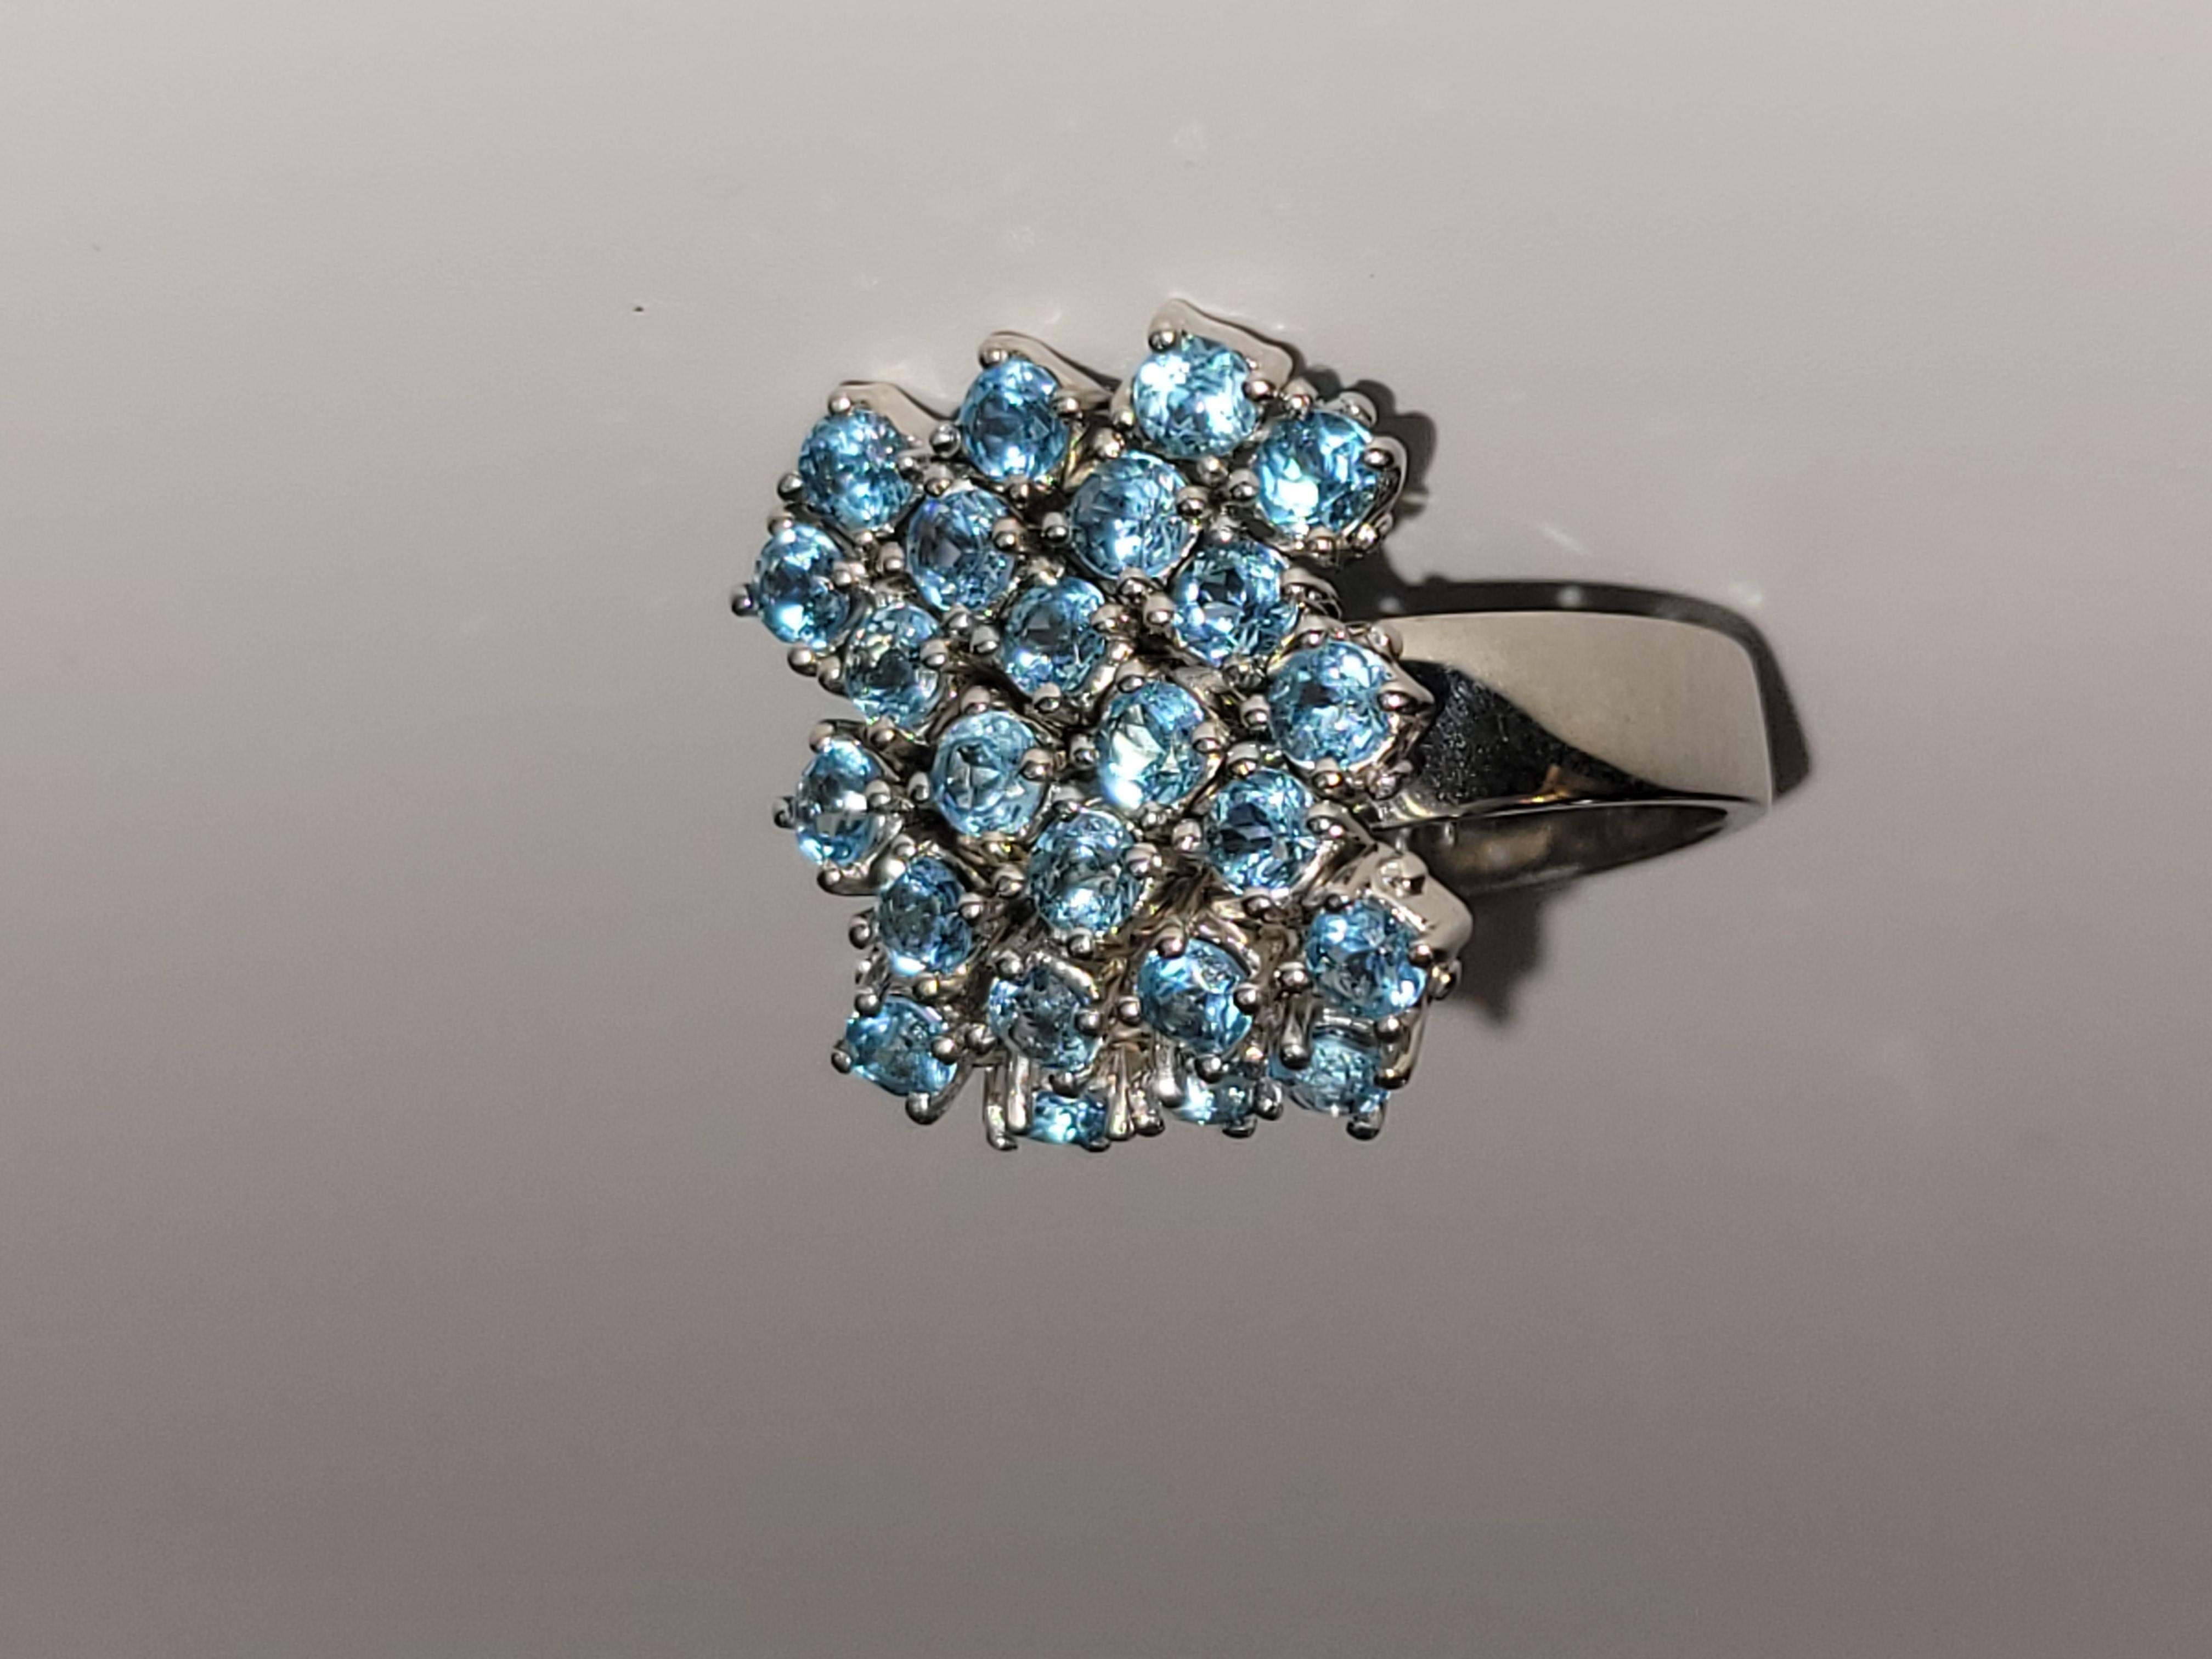 Salavetti  blue topaz ring 18ct   size 6.75 In Excellent Condition For Sale In New York, NY